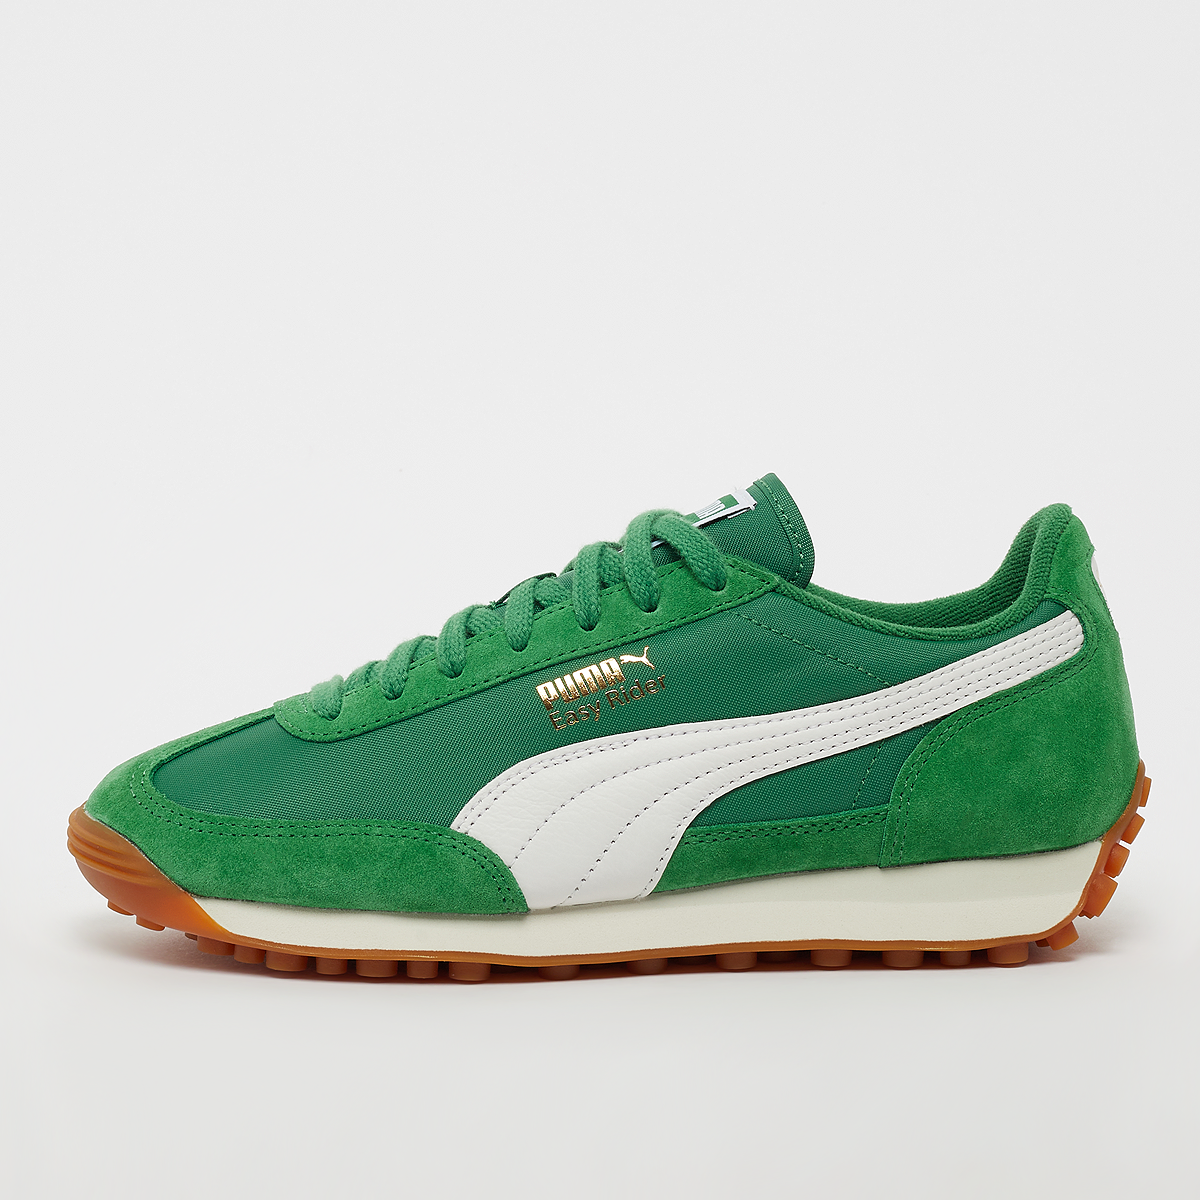 Easy Rider Vintage archive green/white, Puma, Footwear, archive green/white, taille: 41